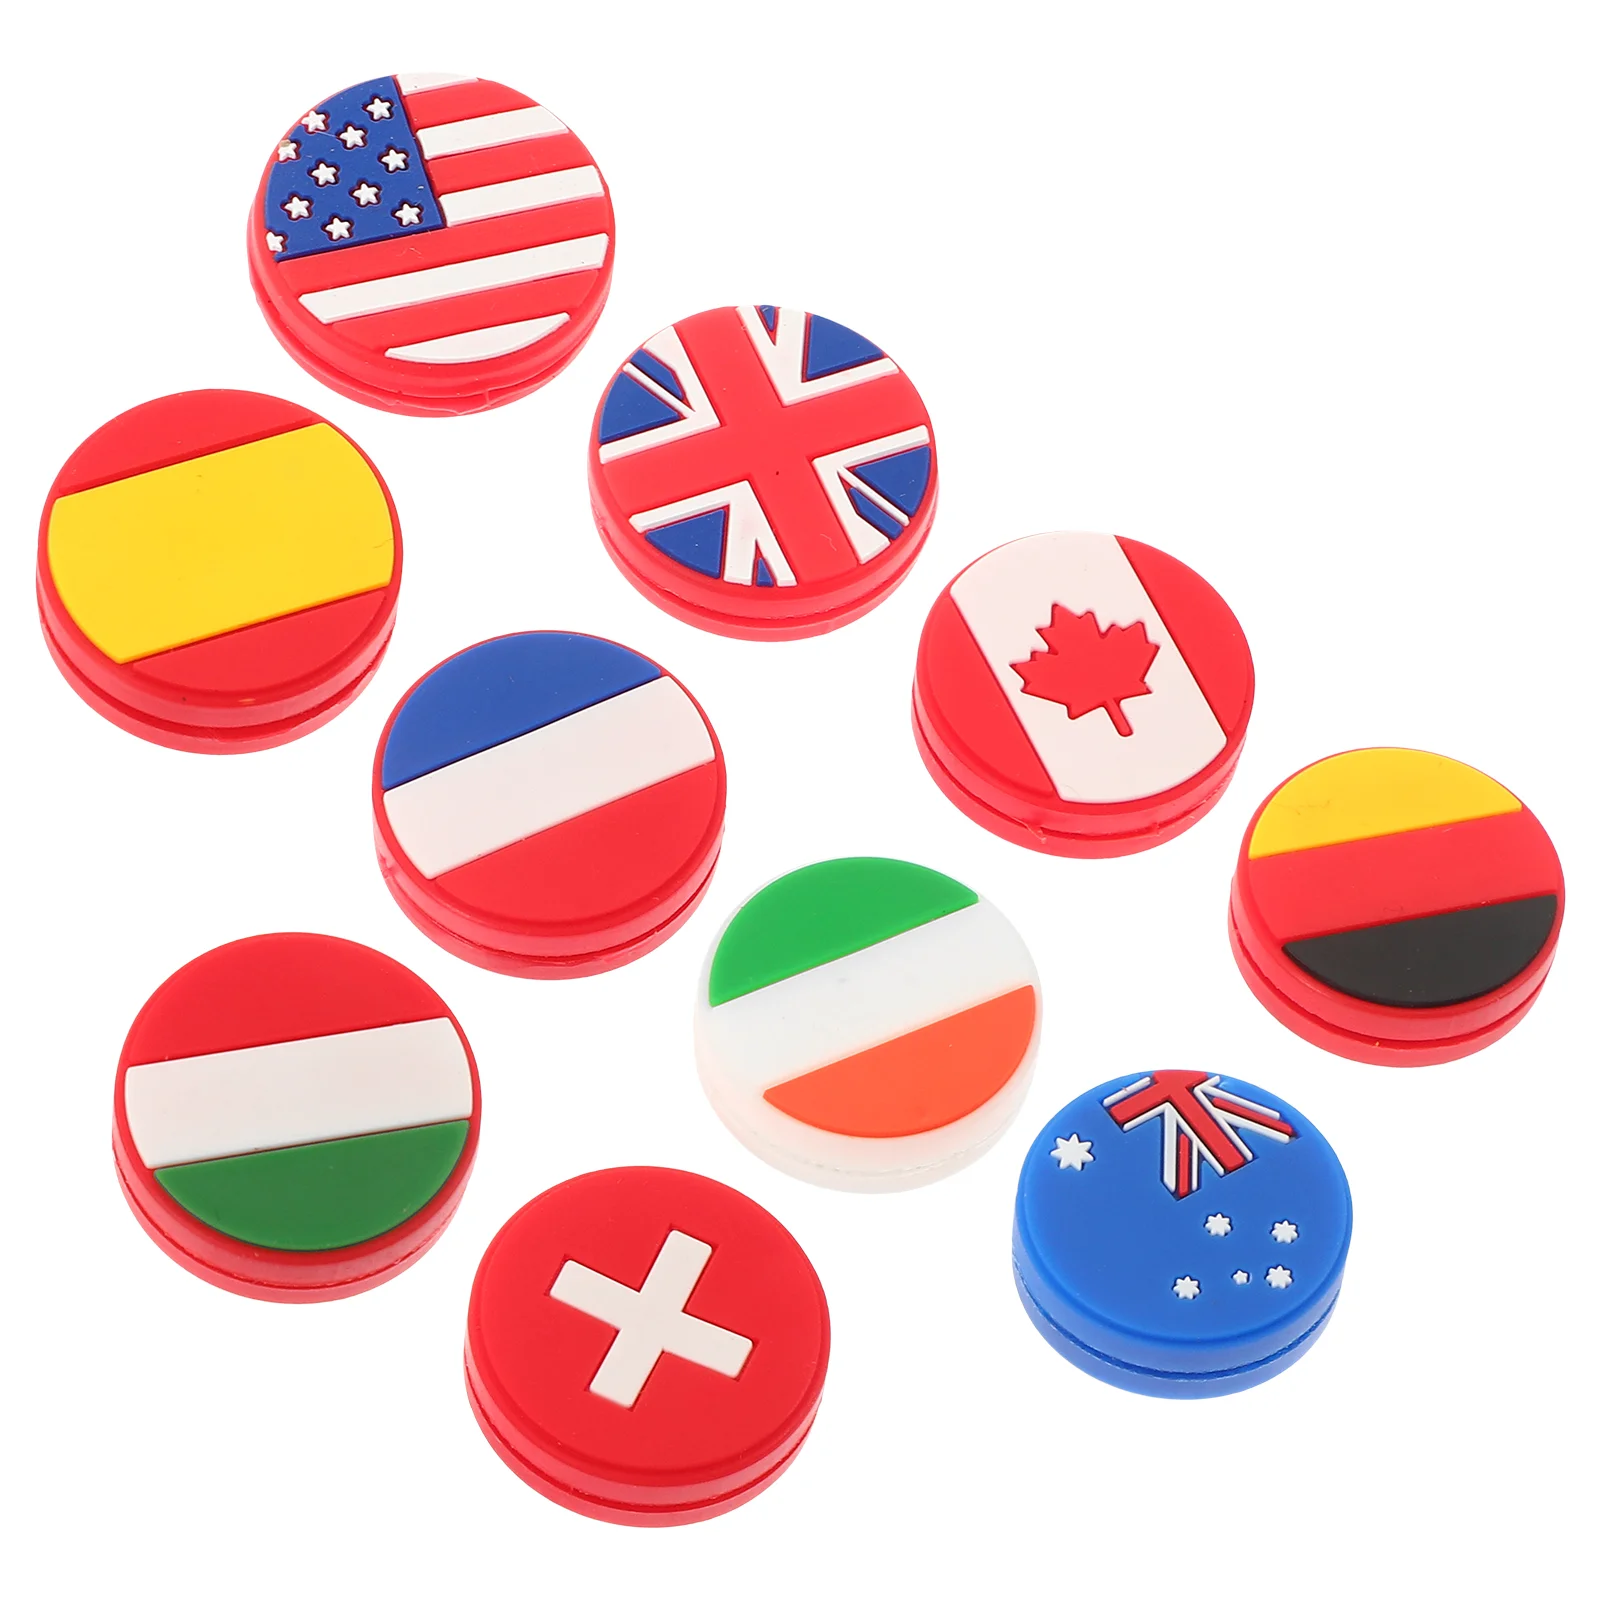 

10PCS Vibration Dampeners Silicone Tennis Dampener National Flag String Absorber Accessory for Tennis Beginners Ladder